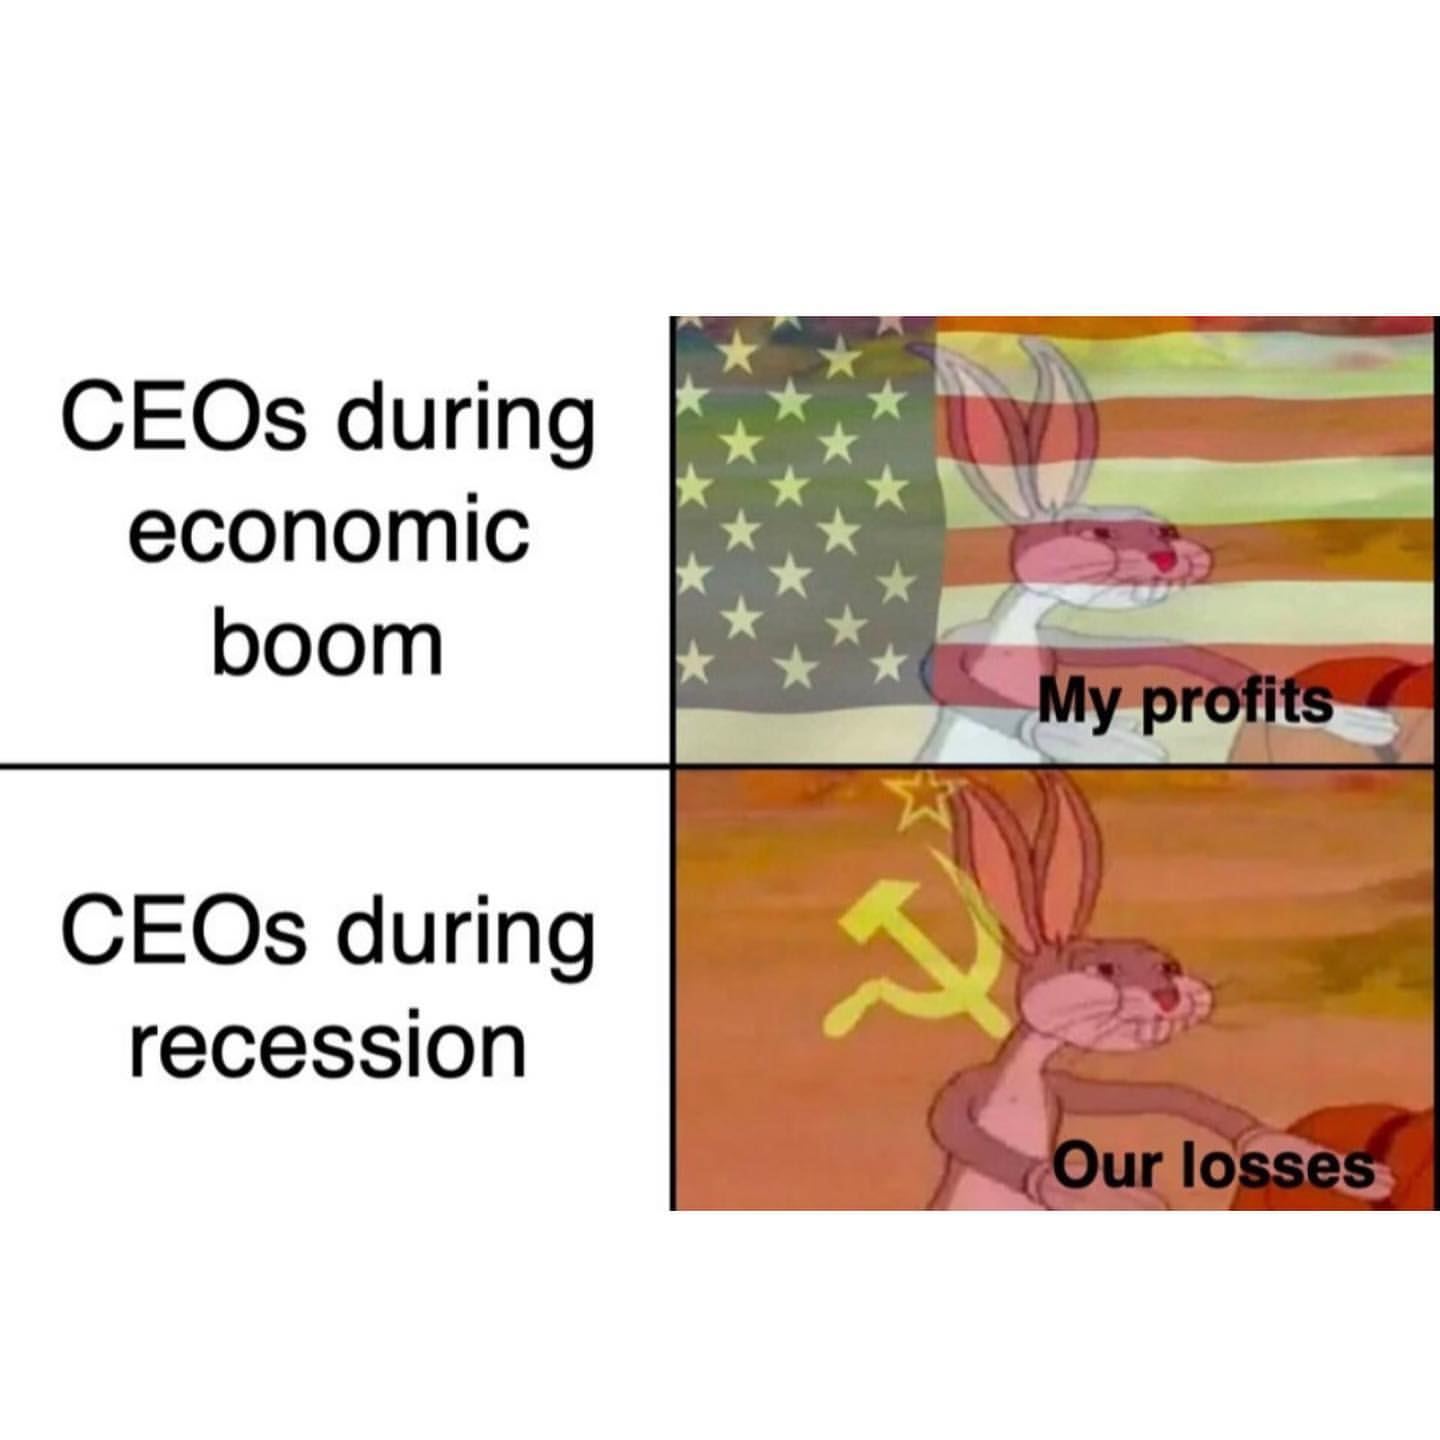 CEOs during economic boom. My profits. CEOs during recession: Our losses.